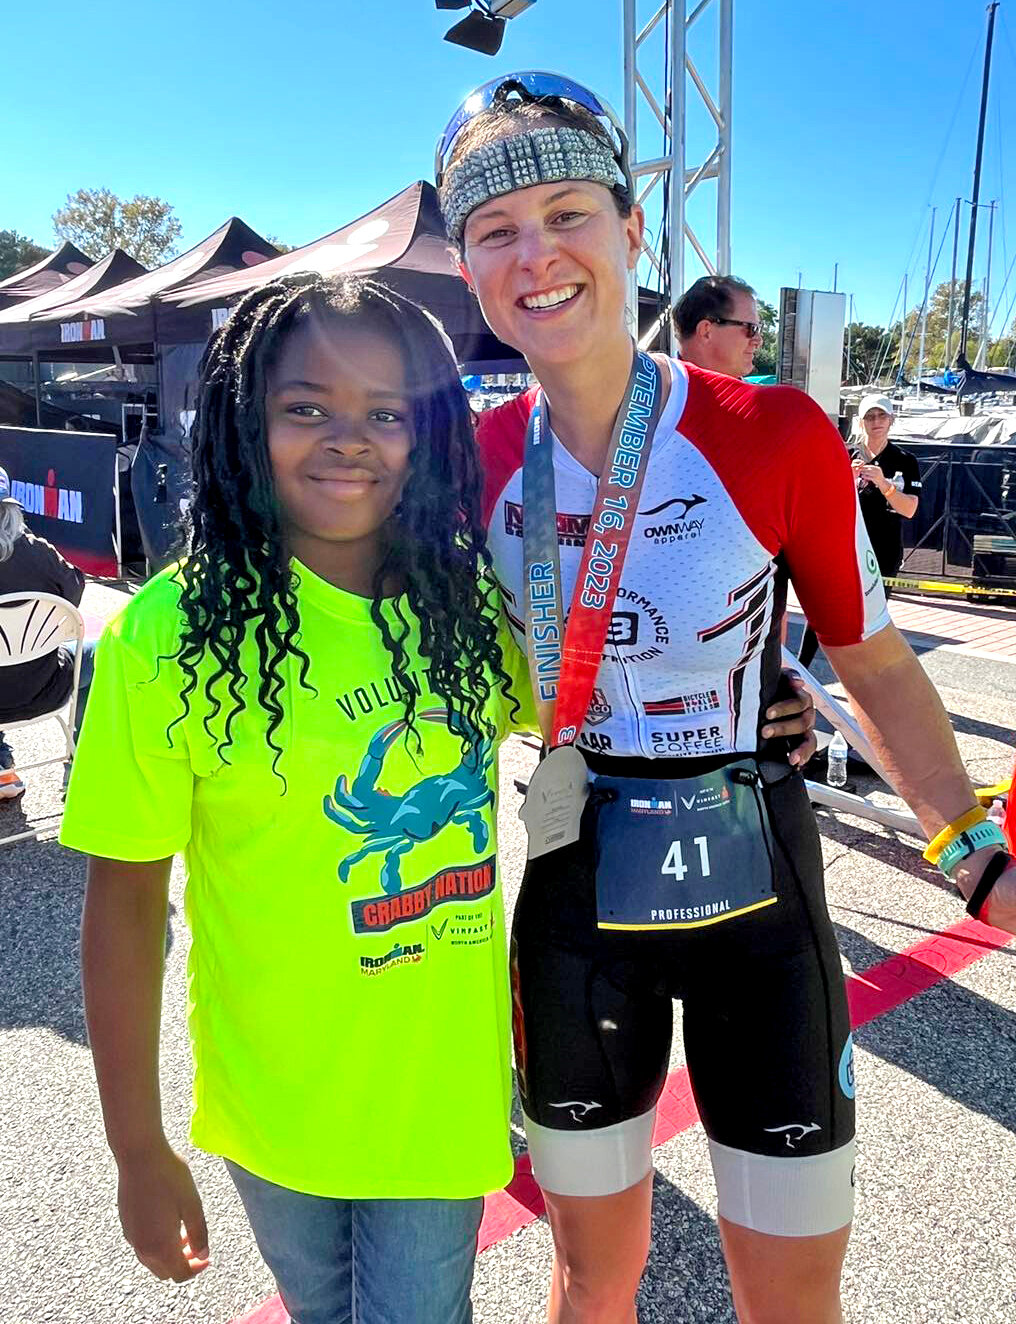 American Alice Alberts was the first woman across the finish line and received her medal from Choptank Elementary 5th grader Ja’Zyiah Mills.